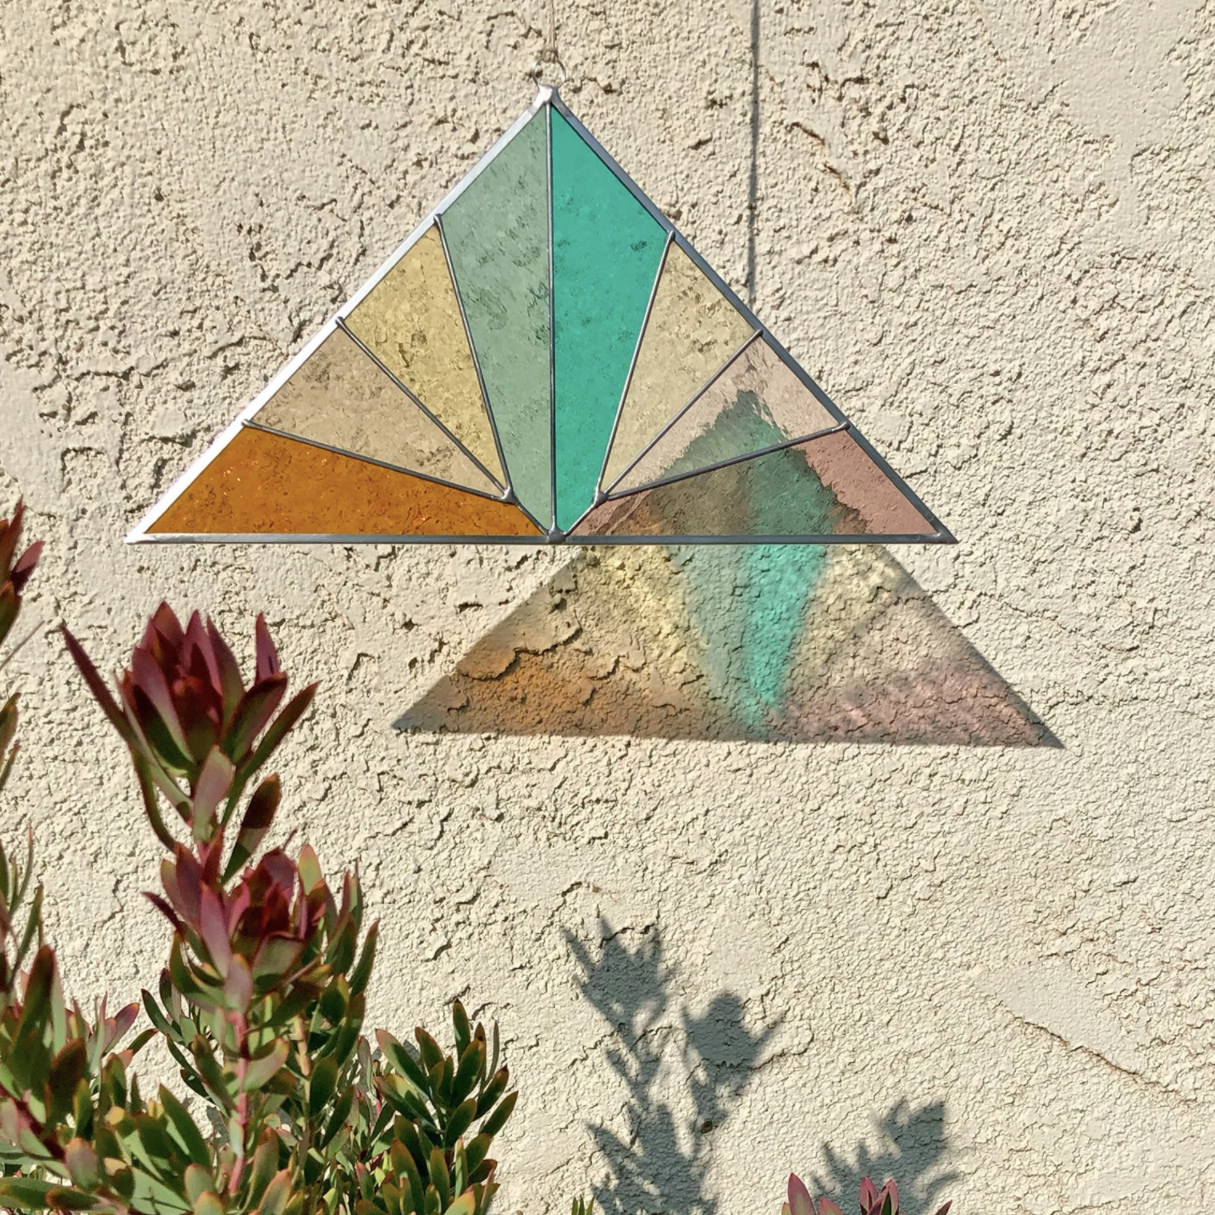 Panel - Large Stained Glass Triangle - Bliss